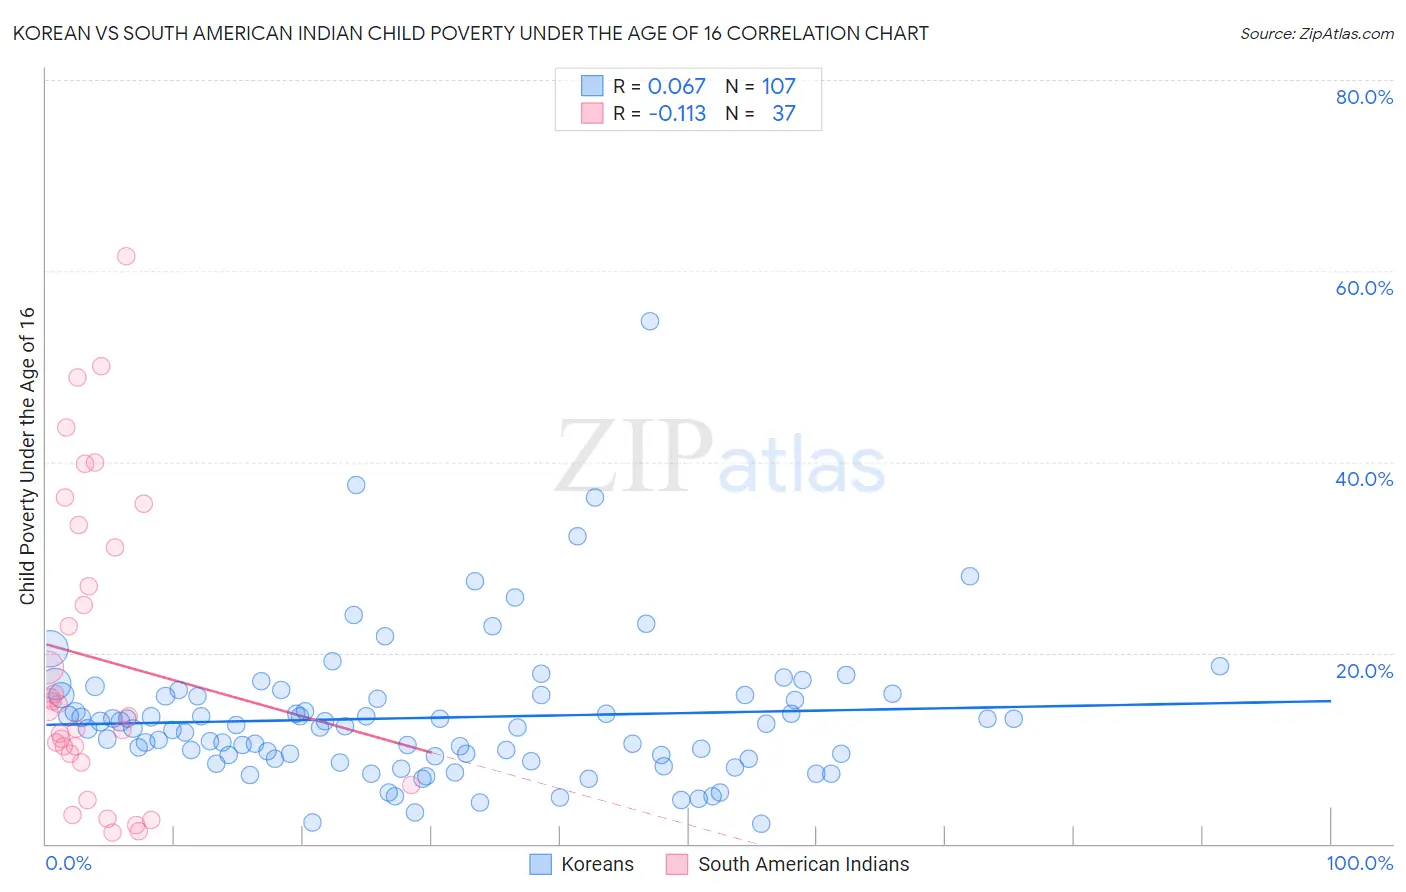 Korean vs South American Indian Child Poverty Under the Age of 16